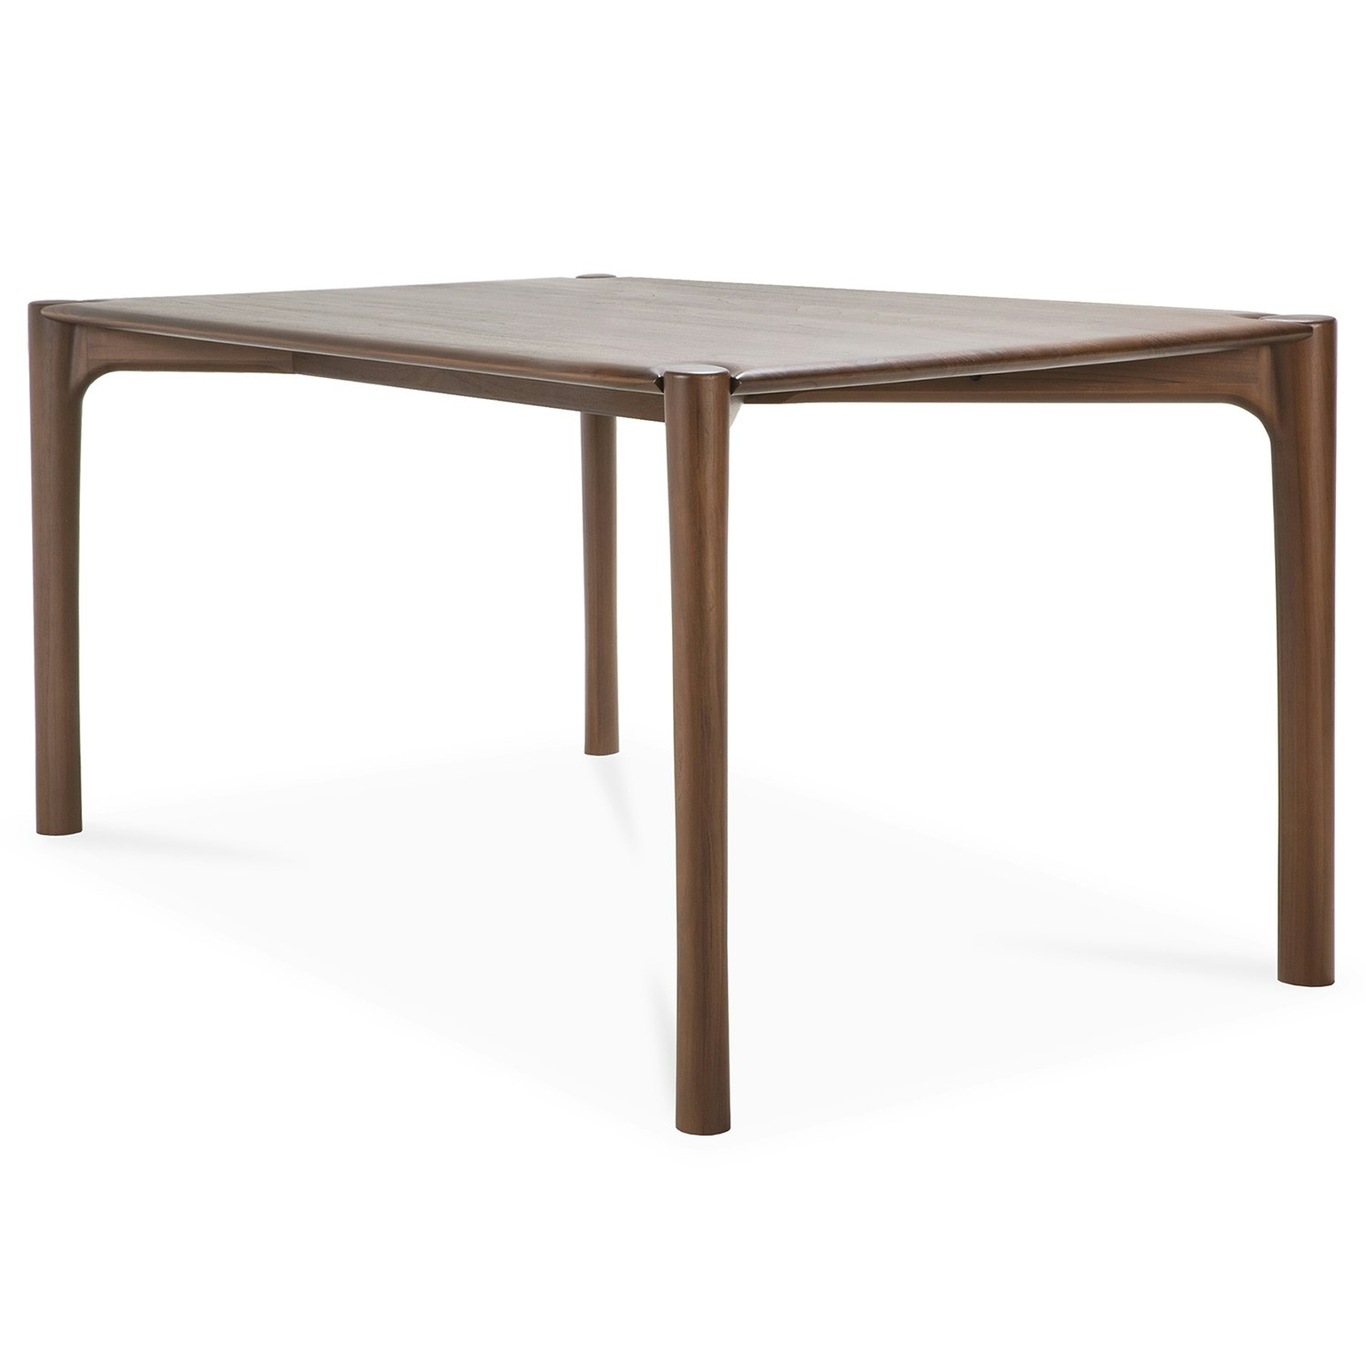 PI Dining Table Dark Stained Teak, 90x180 cm